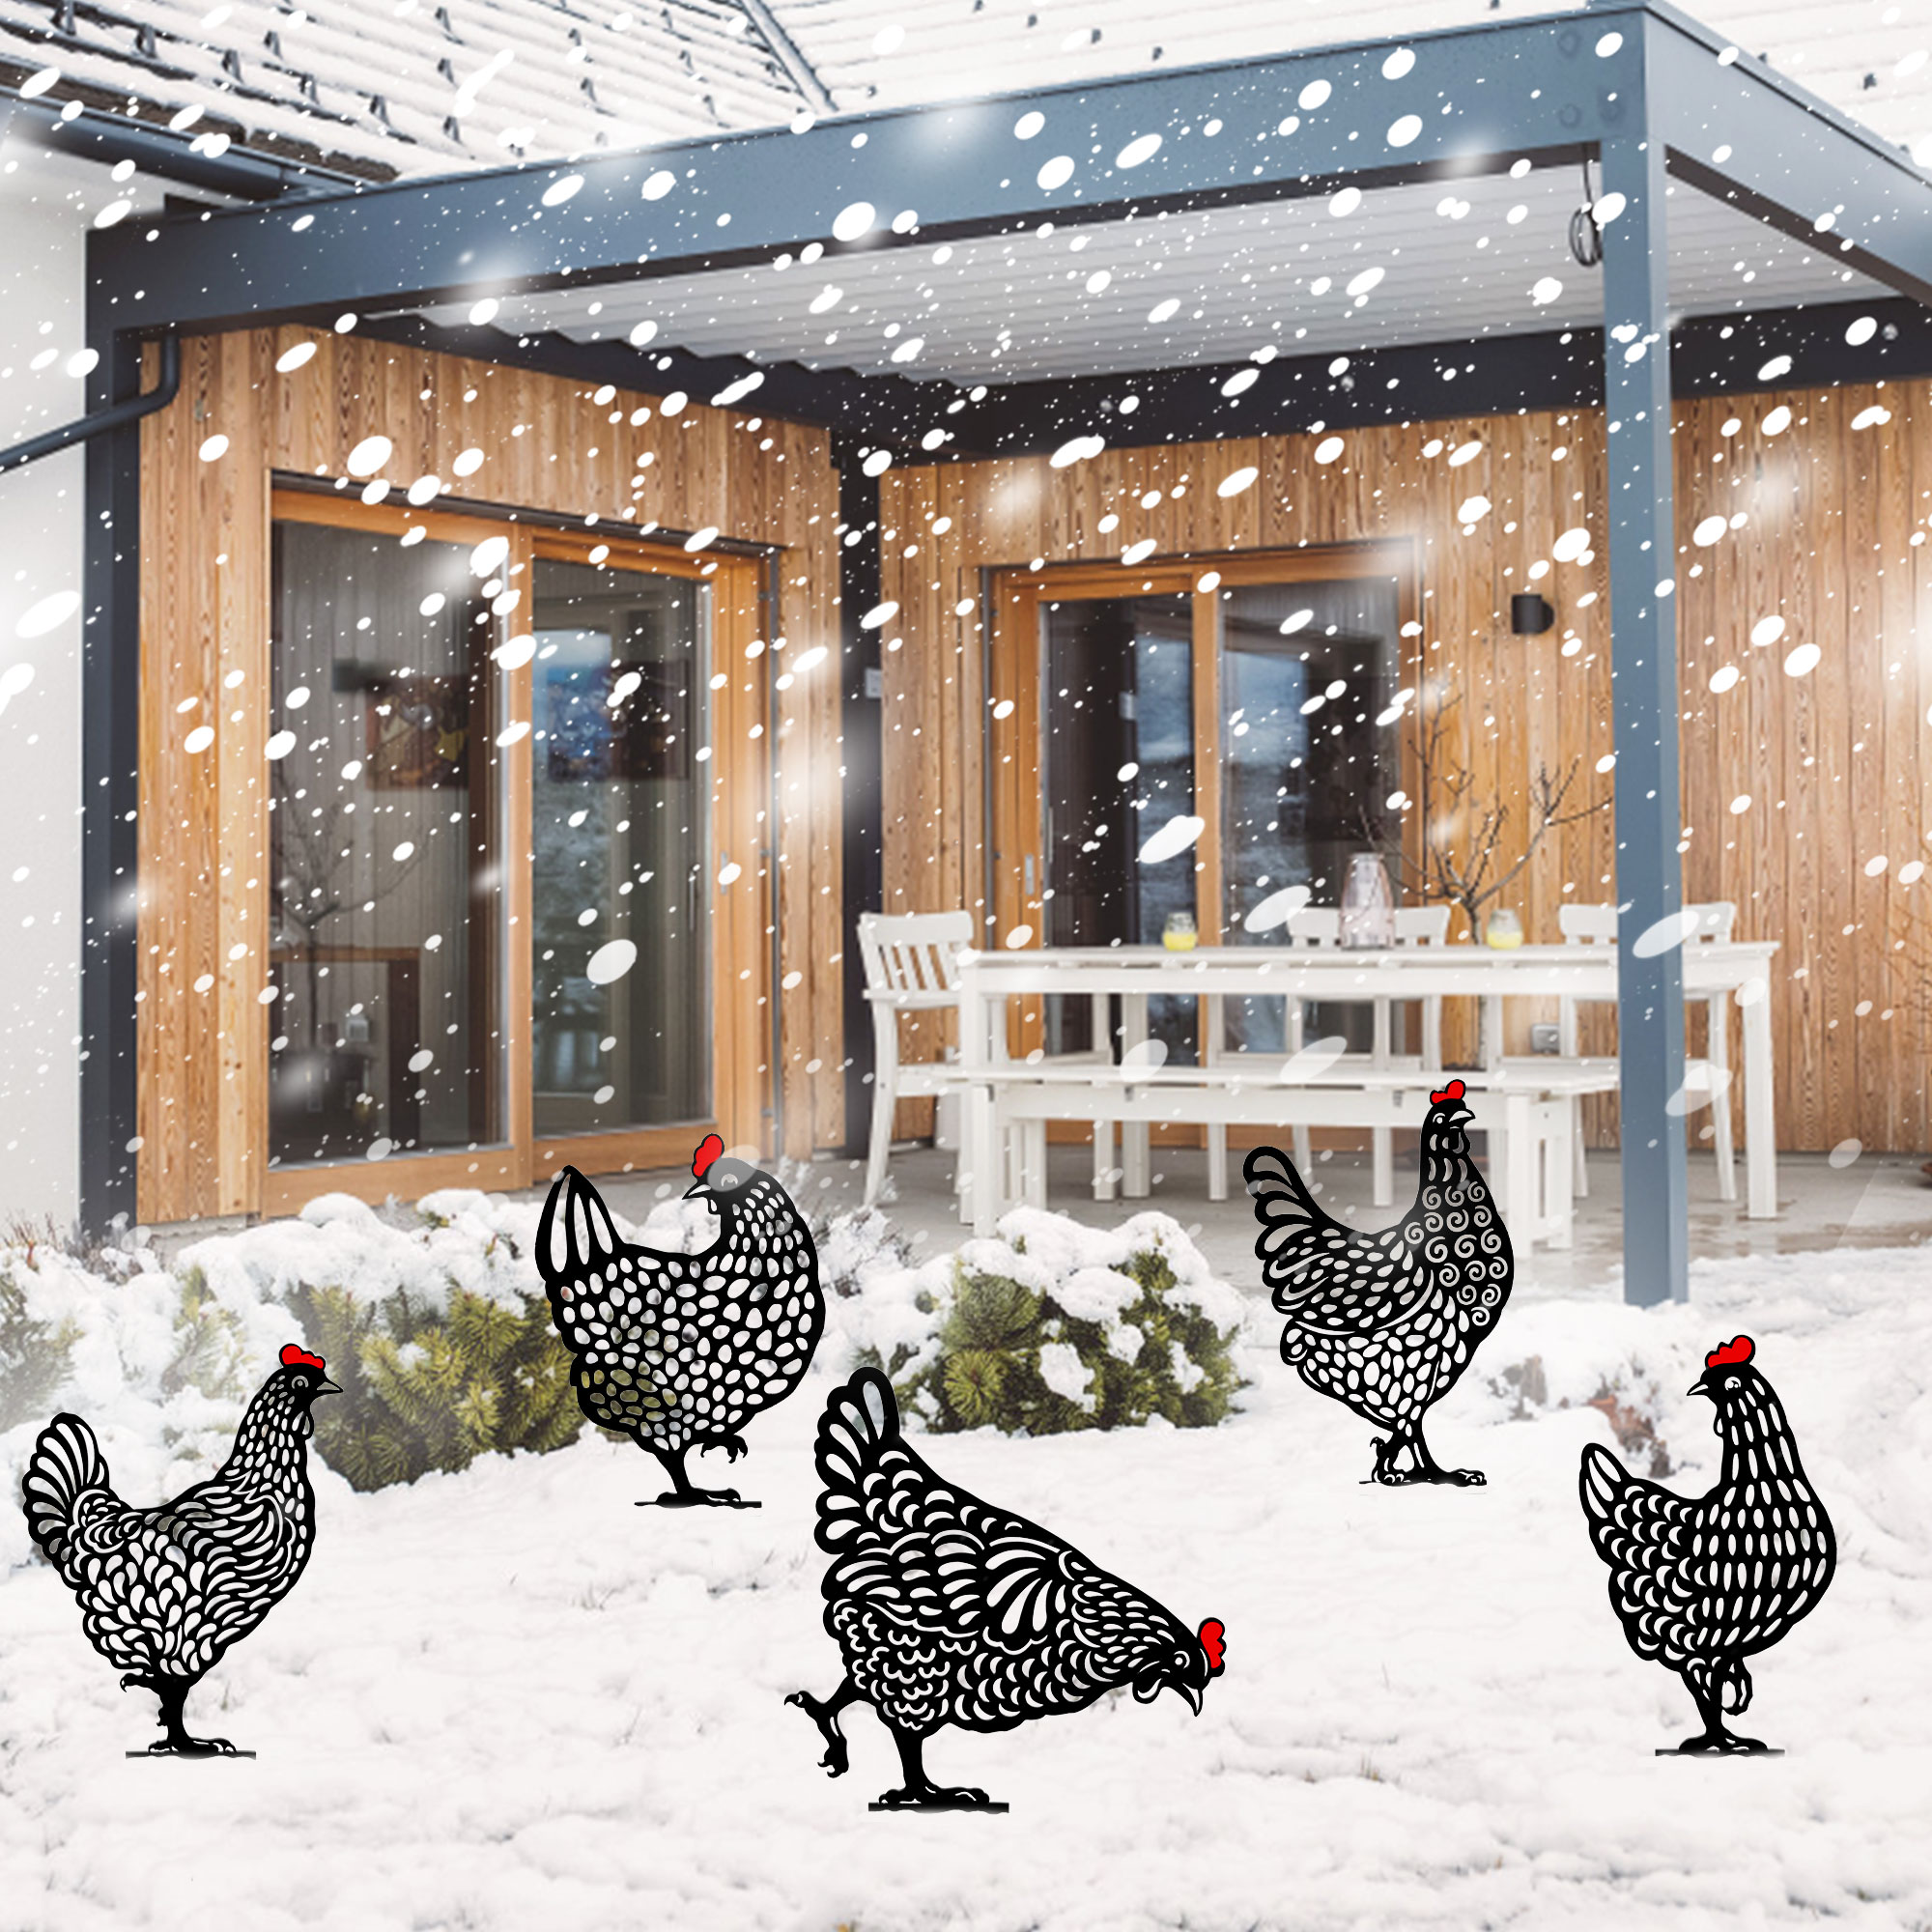 EEEkit 5pcs Garden Rooster Decorative Stakes, Chicken Silhouette Art Hollow Out Animal Shape Decors for Outdoor, Black - image 4 of 5